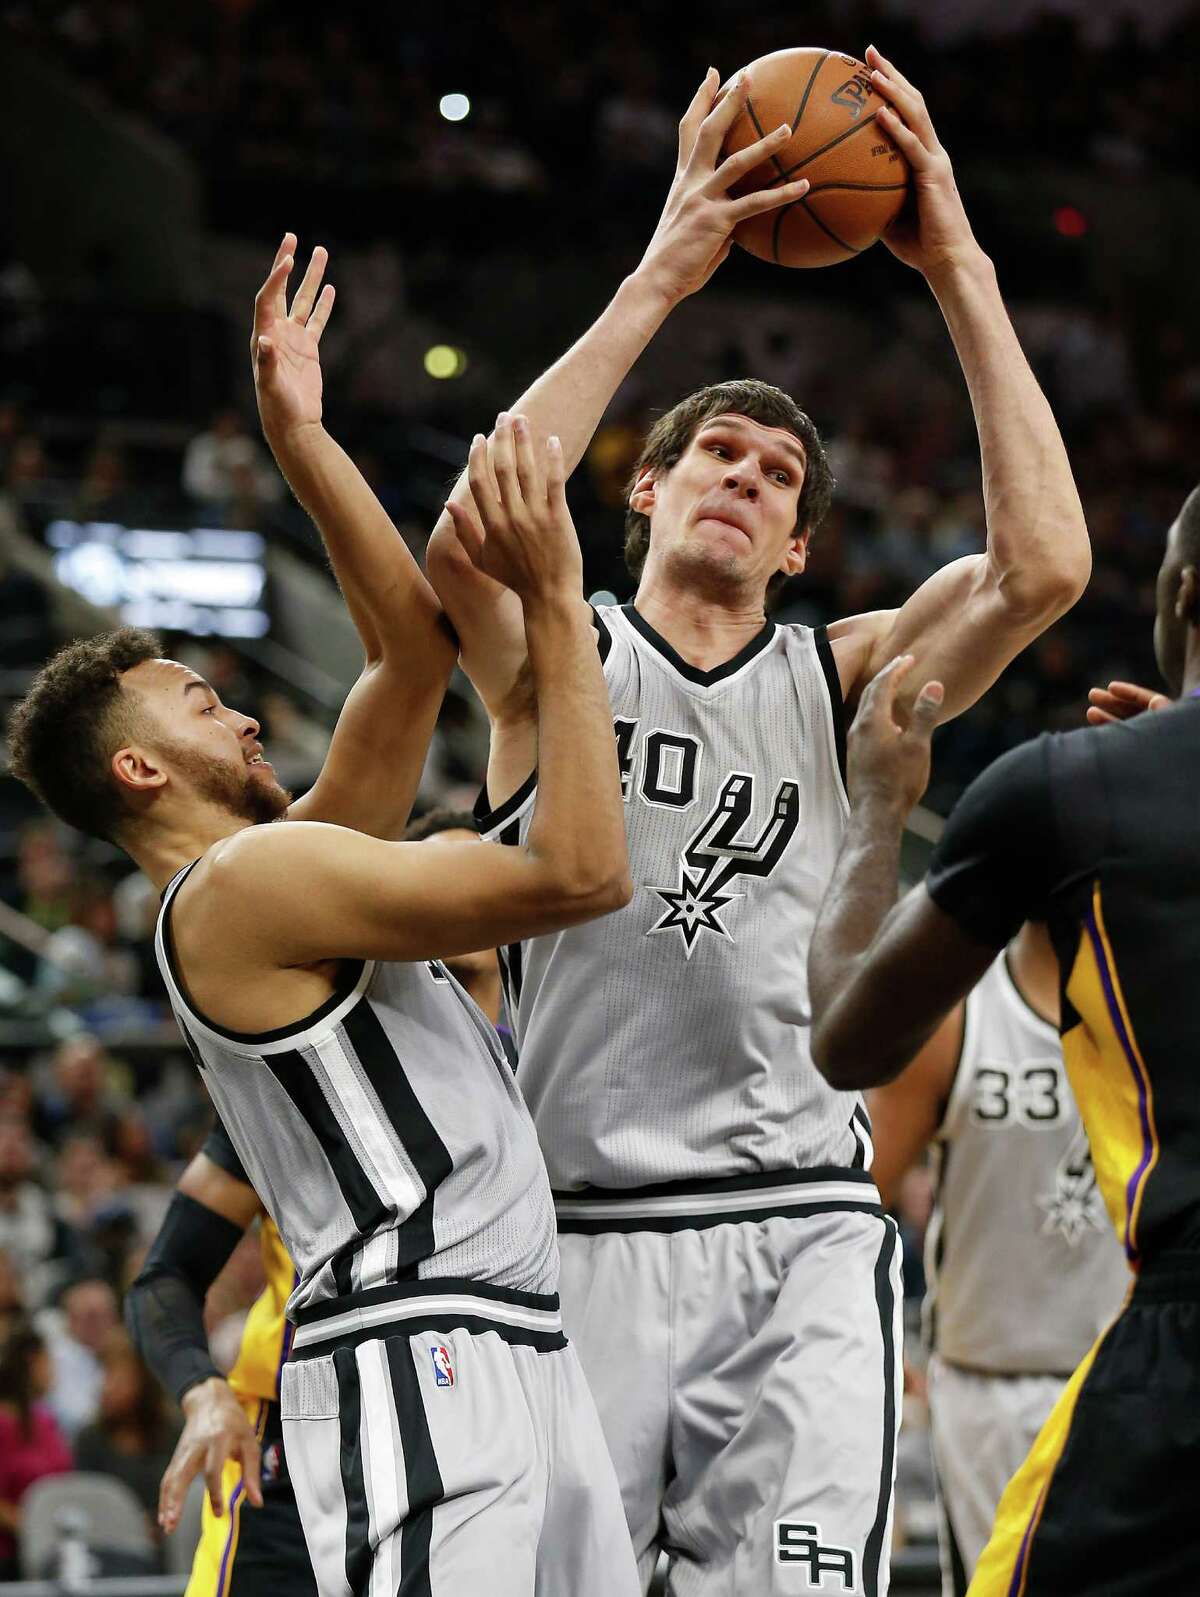 Boban Marjanovic 7-4 C agrees to a deal with SAS - Page 6 - RealGM